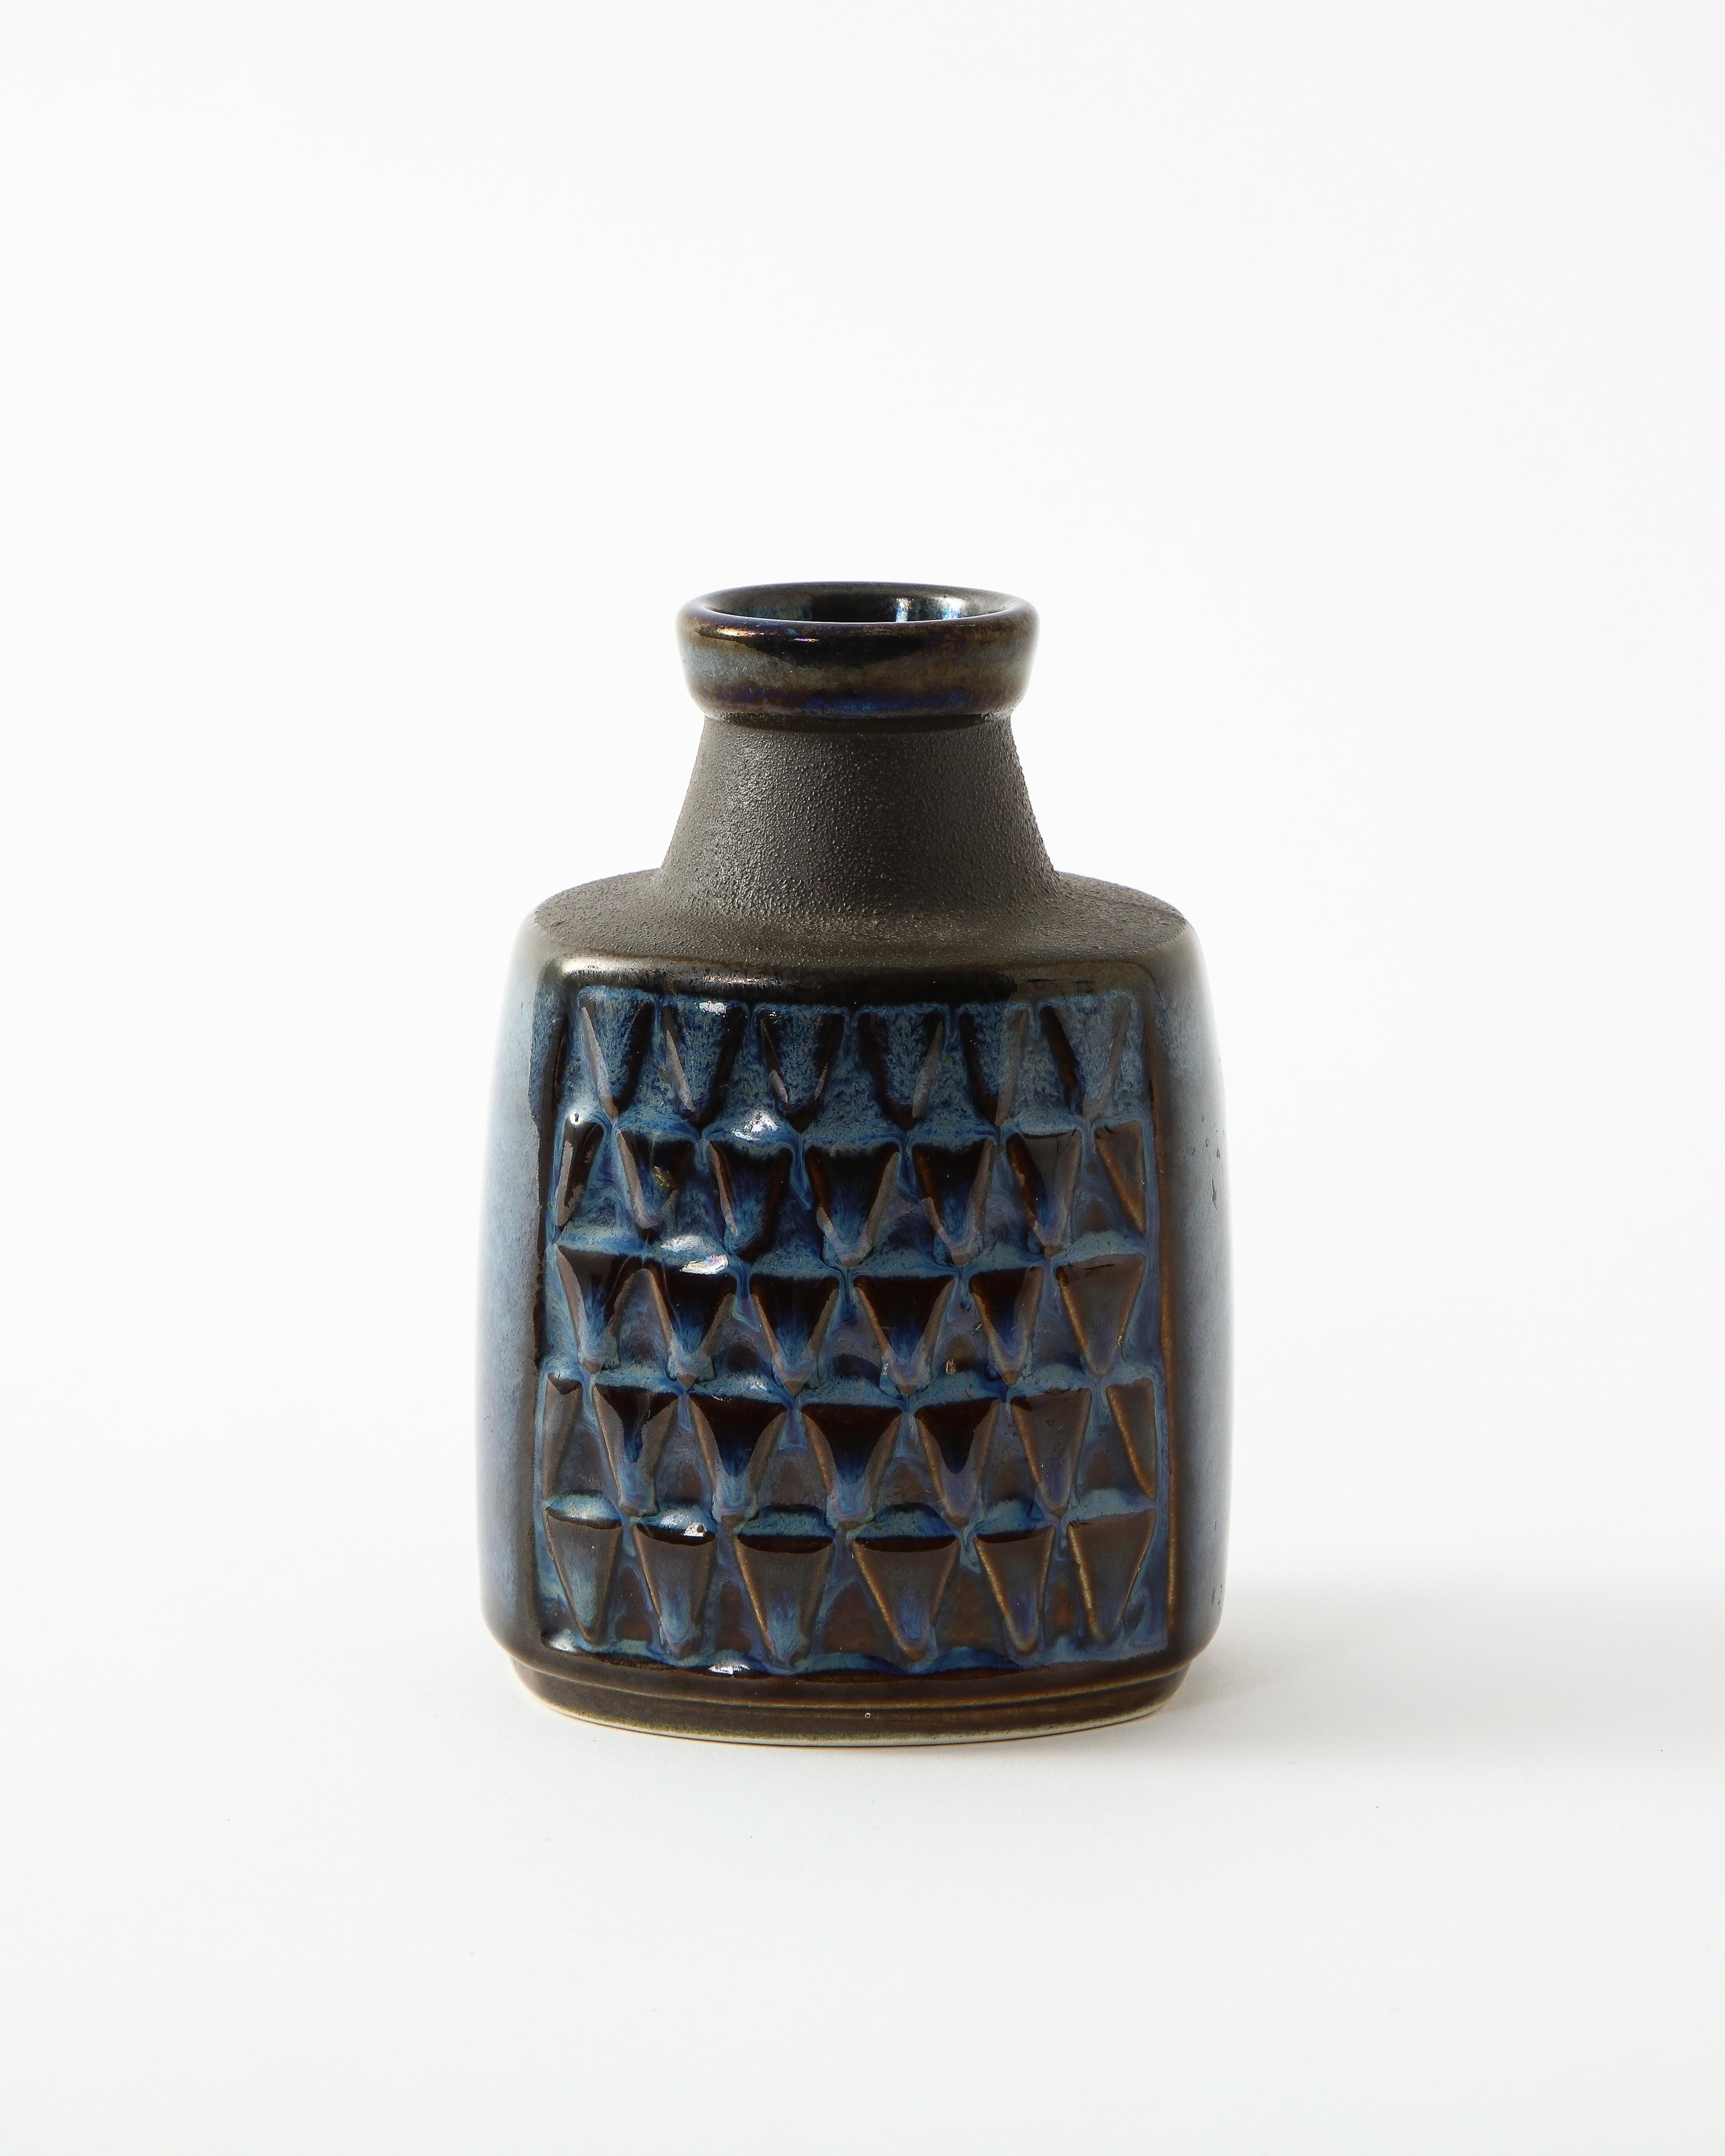 Elegant black ceramic vase in handsome deep blue glaze. Pressed triangular pattern on interior. Highlights and lowlights of glaze are characteristic of this style of pottery. Marked and numbered Søholm, Denmark. Bottleneck opening.